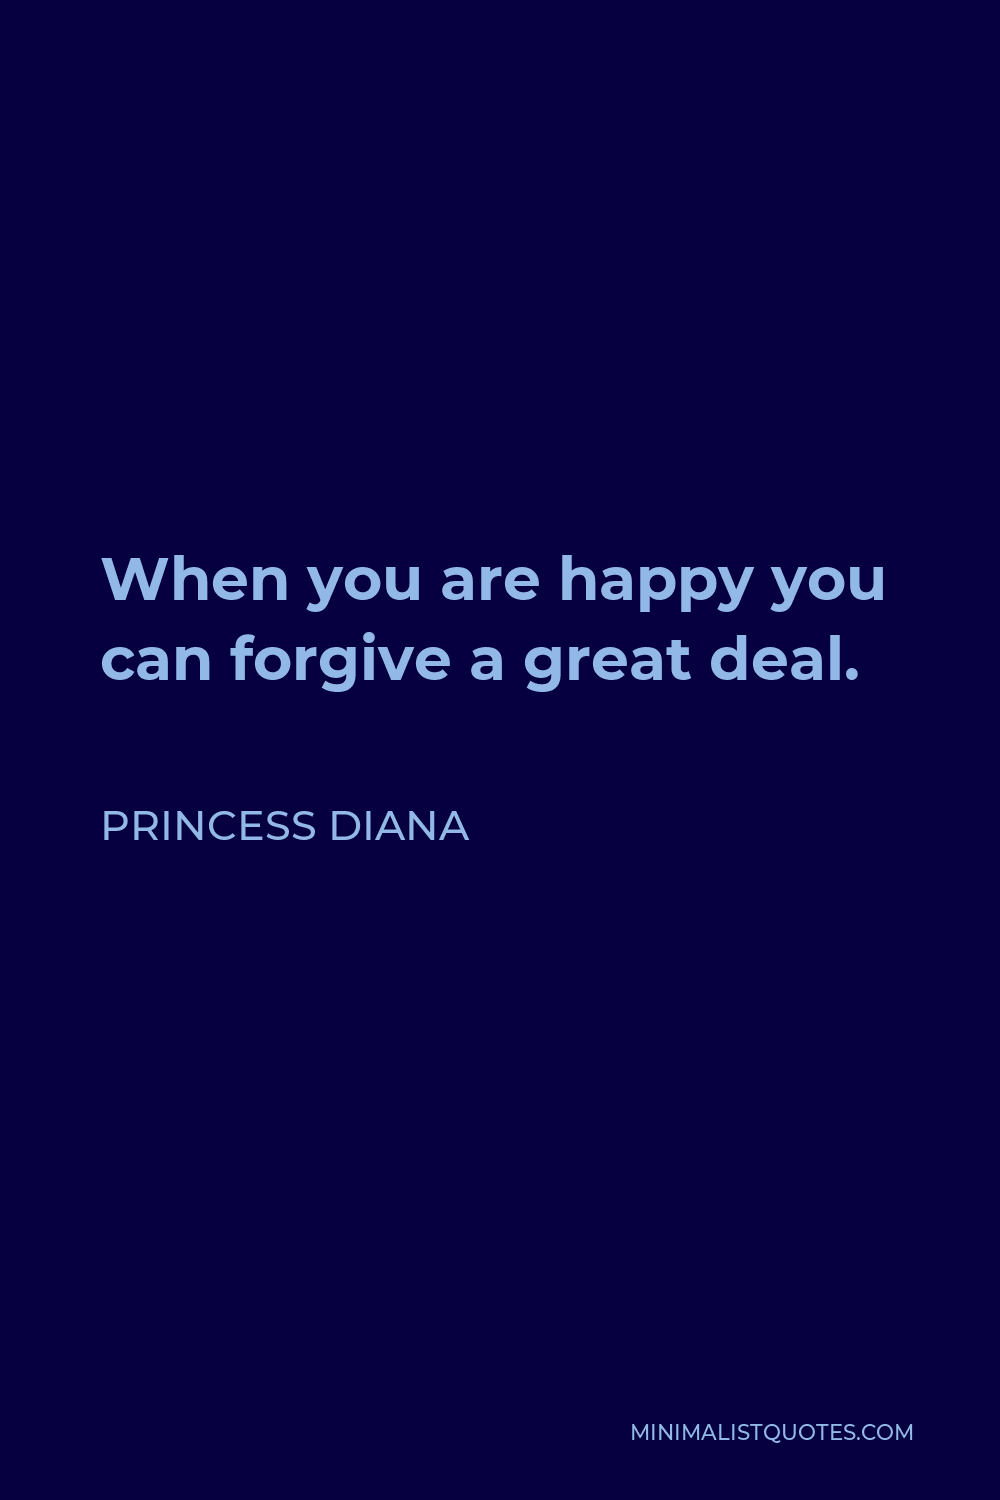 Princess Diana Quote - When you are happy you can forgive a great deal.